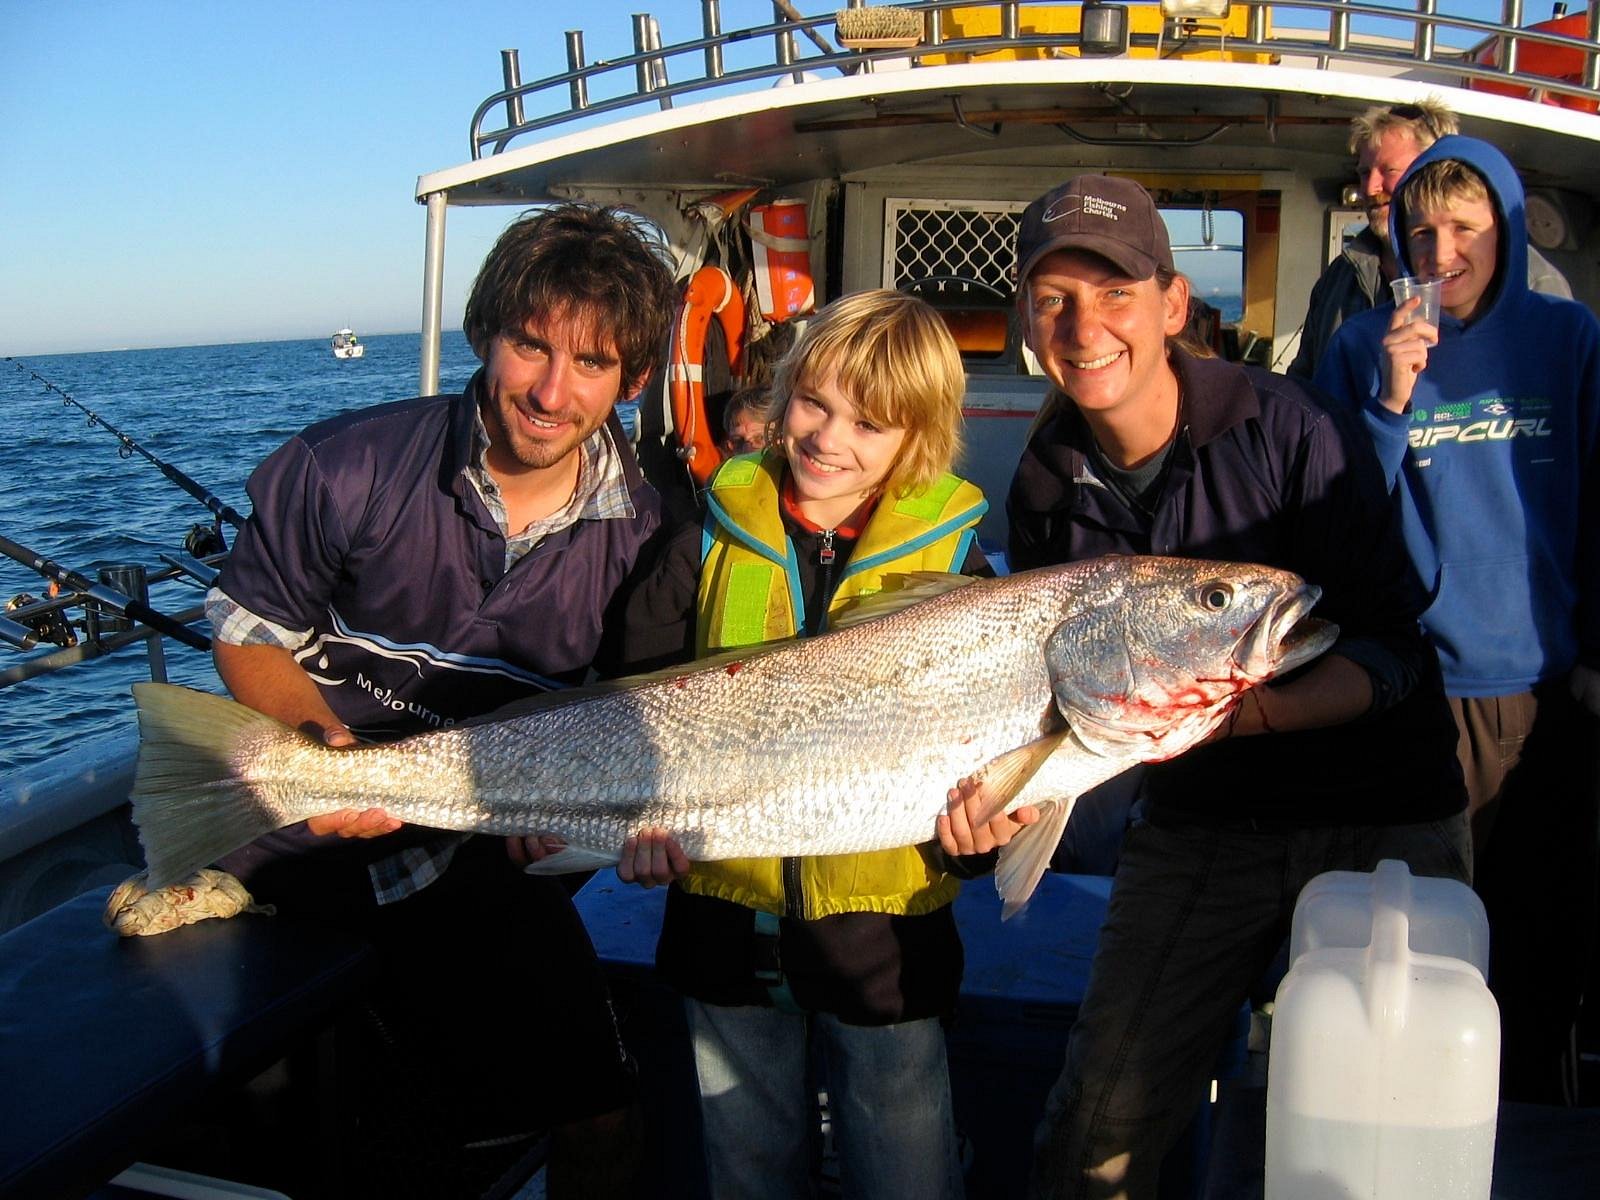 Melbourne Fishing Charters (St Kilda) All You Need to Know